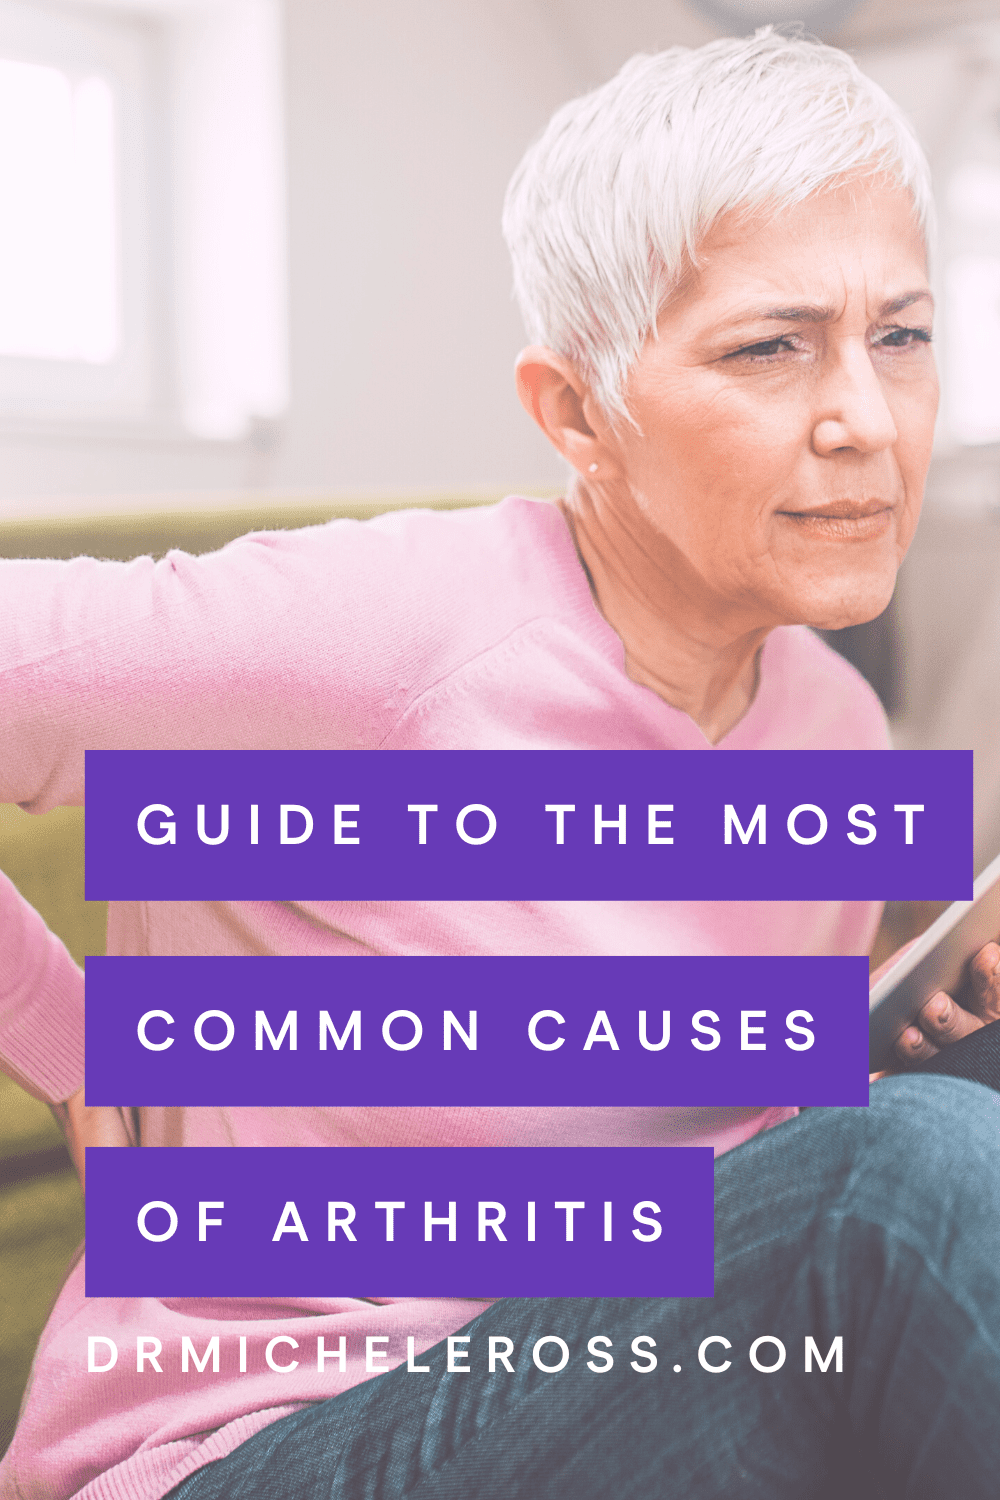 A Guide To The Most Common Causes of Arthritis